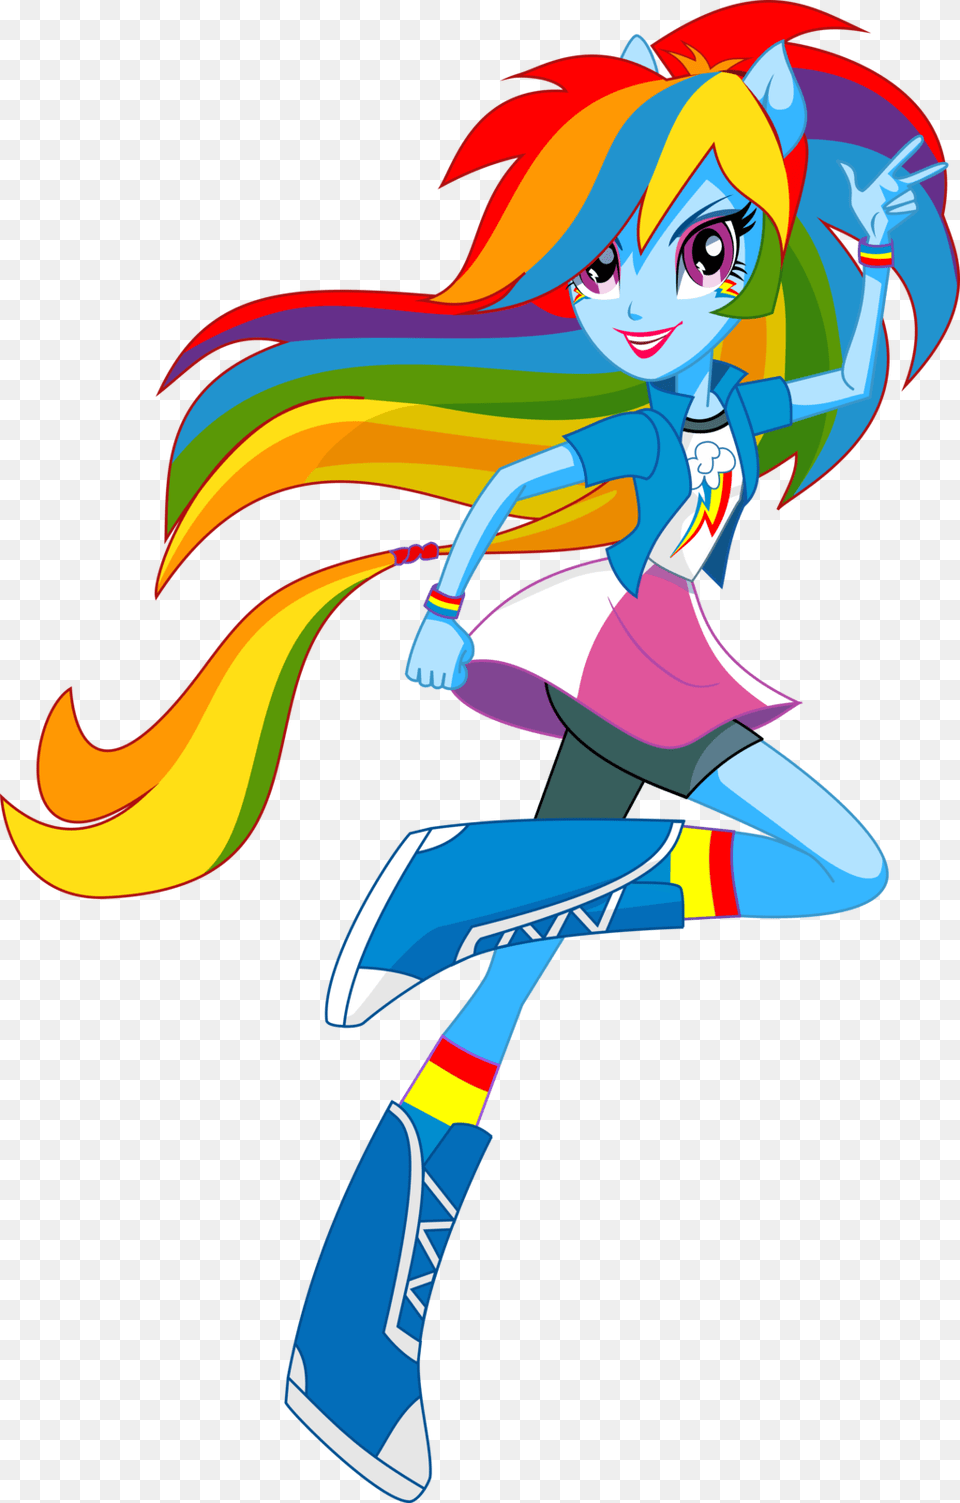 My Little Pony Coloring Pages Rarity In Dress For Kids Rainbow Dash Equestria Girl, Art, Book, Comics, Graphics Png